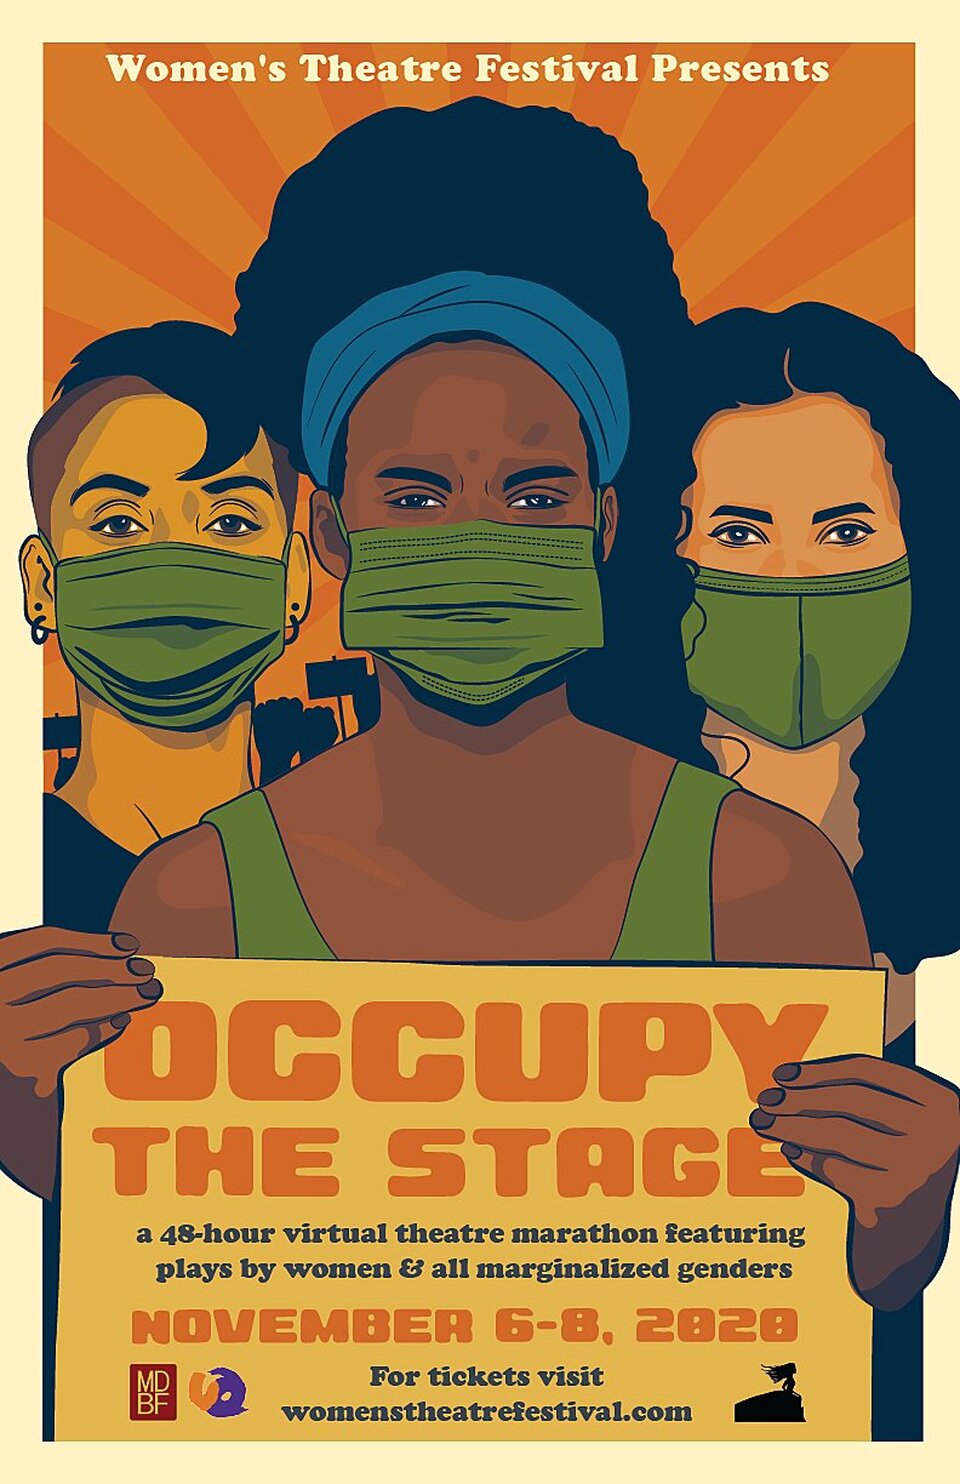 Theatre poster art for Occupy the Stage, a 48-hour virtual theatre marathon featuring plays by women and all marginalized genders. November 6-8, 2020. Poster shows artwork of three women of varying backgrounds holding the event notice.